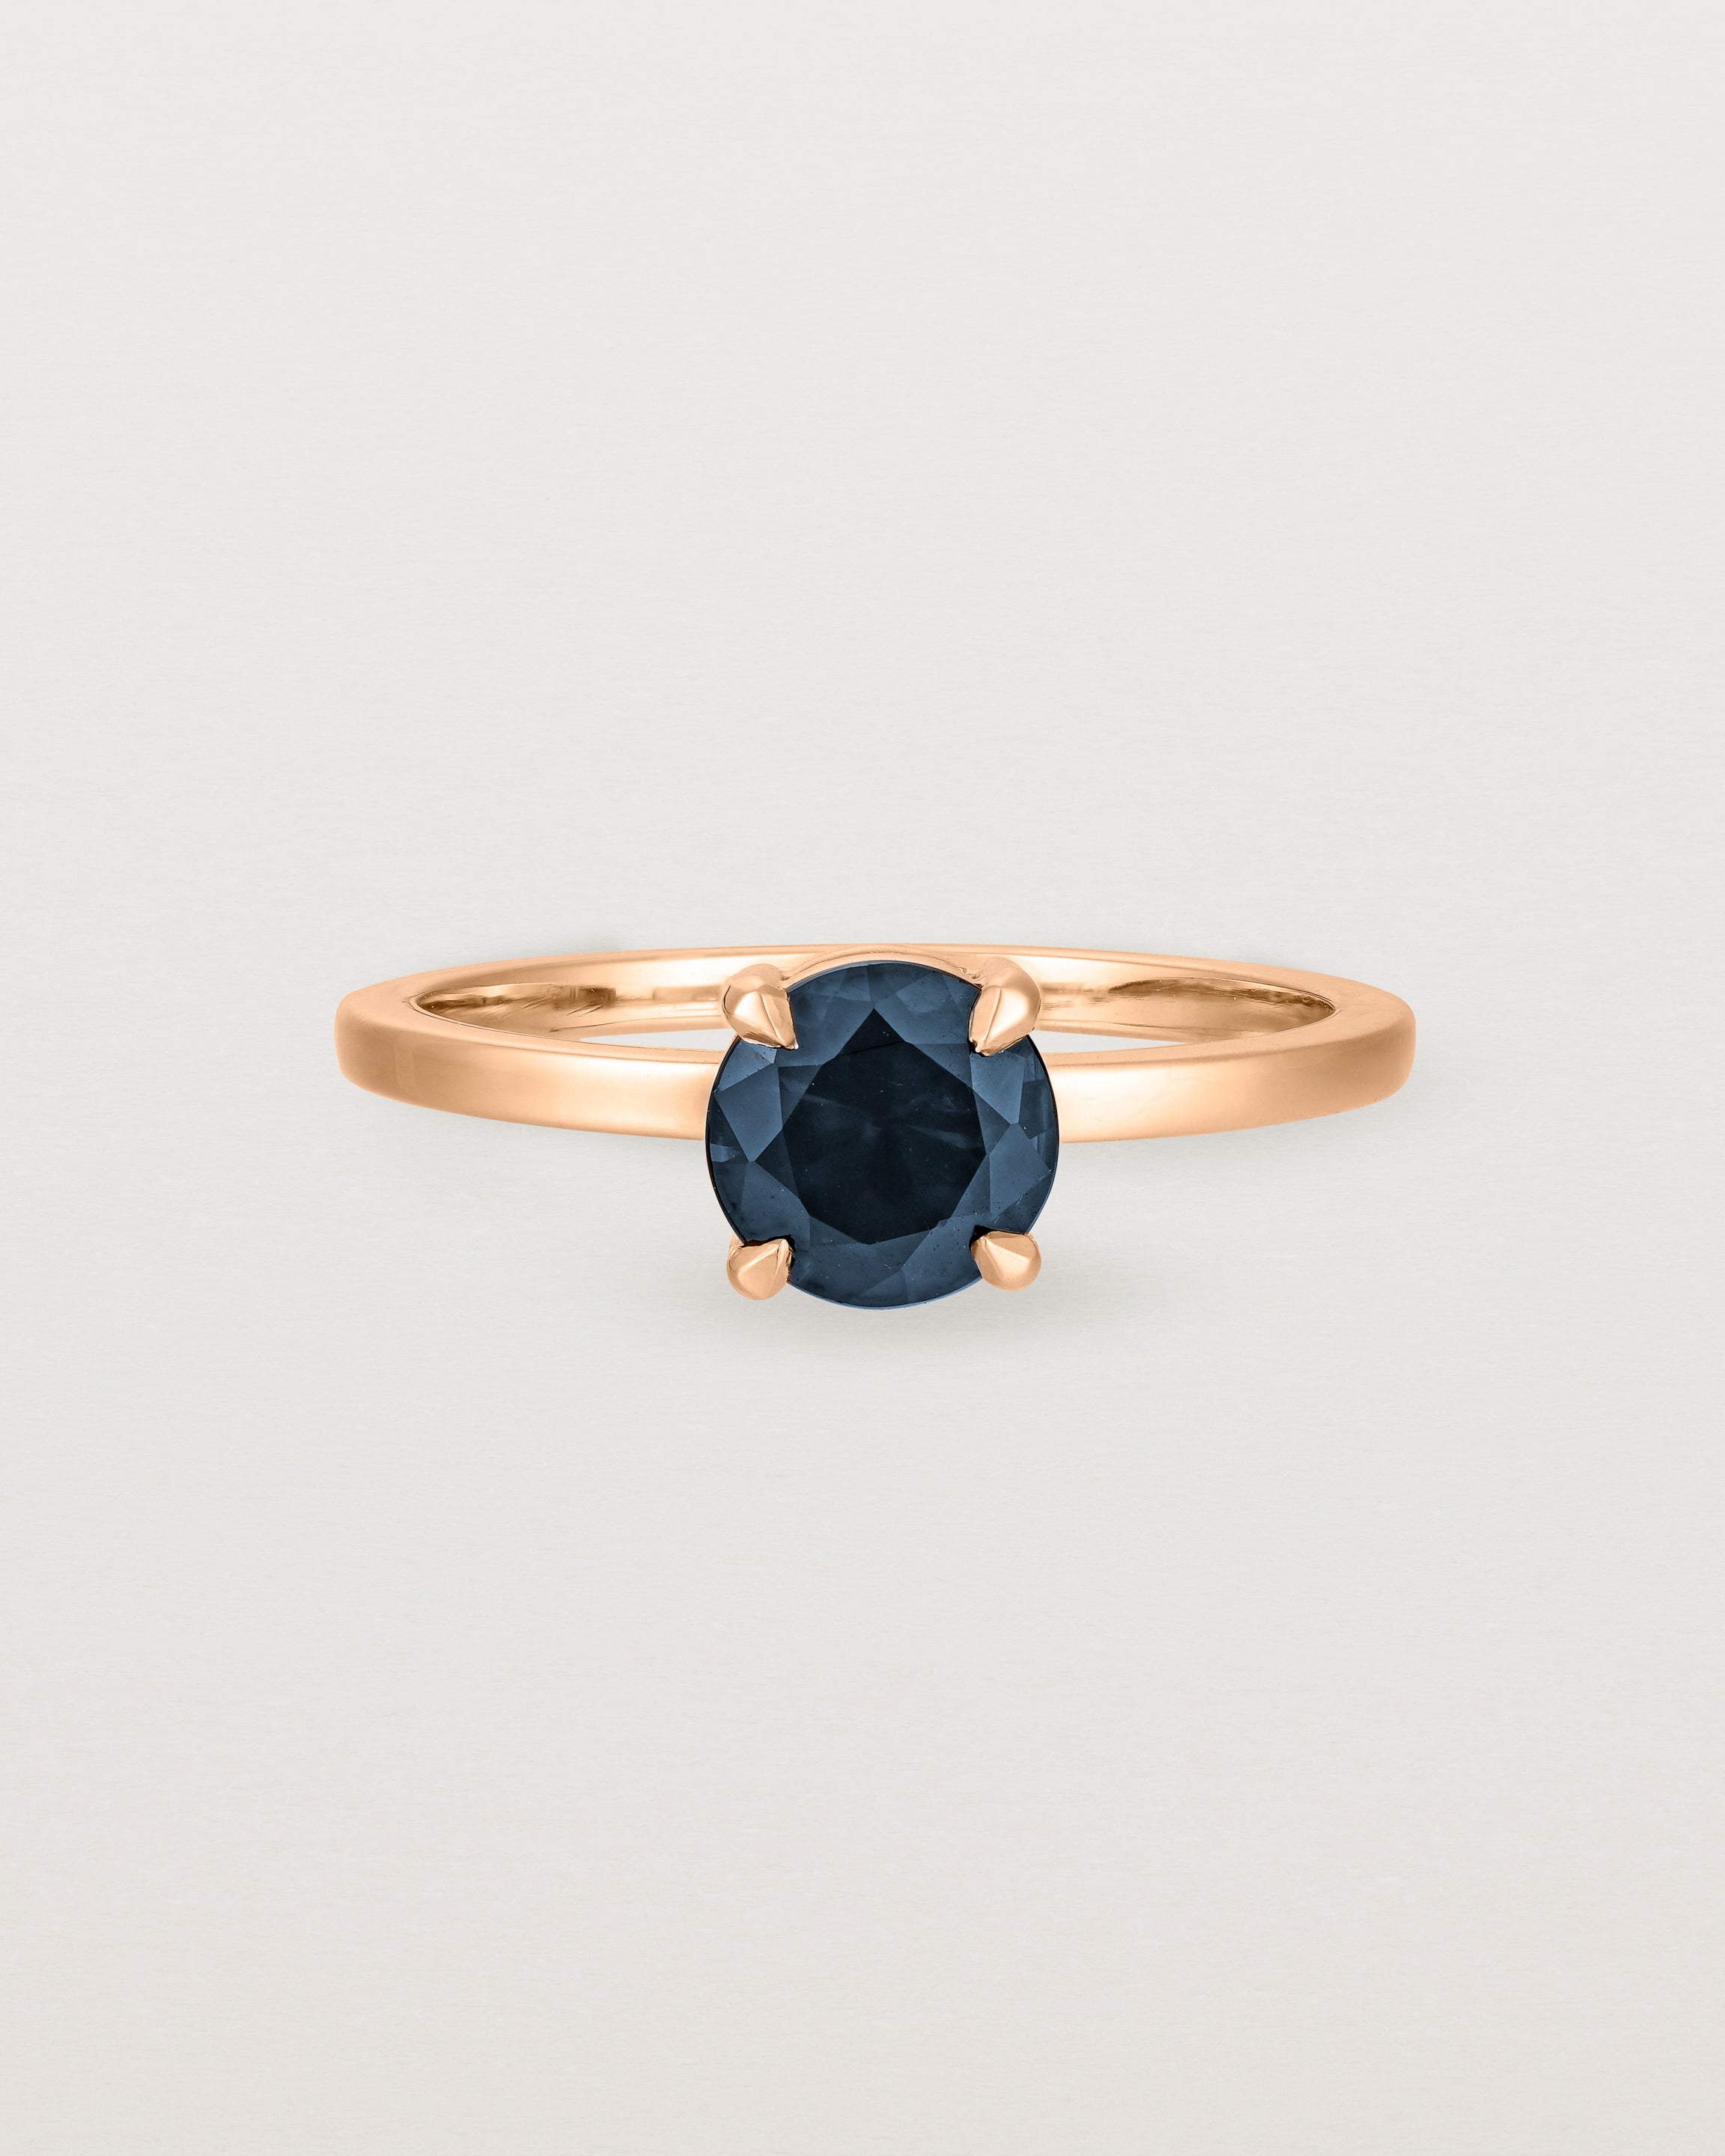 Front view of the Petite Una Round Solitaire | Australian Sapphire | Rose Gold.